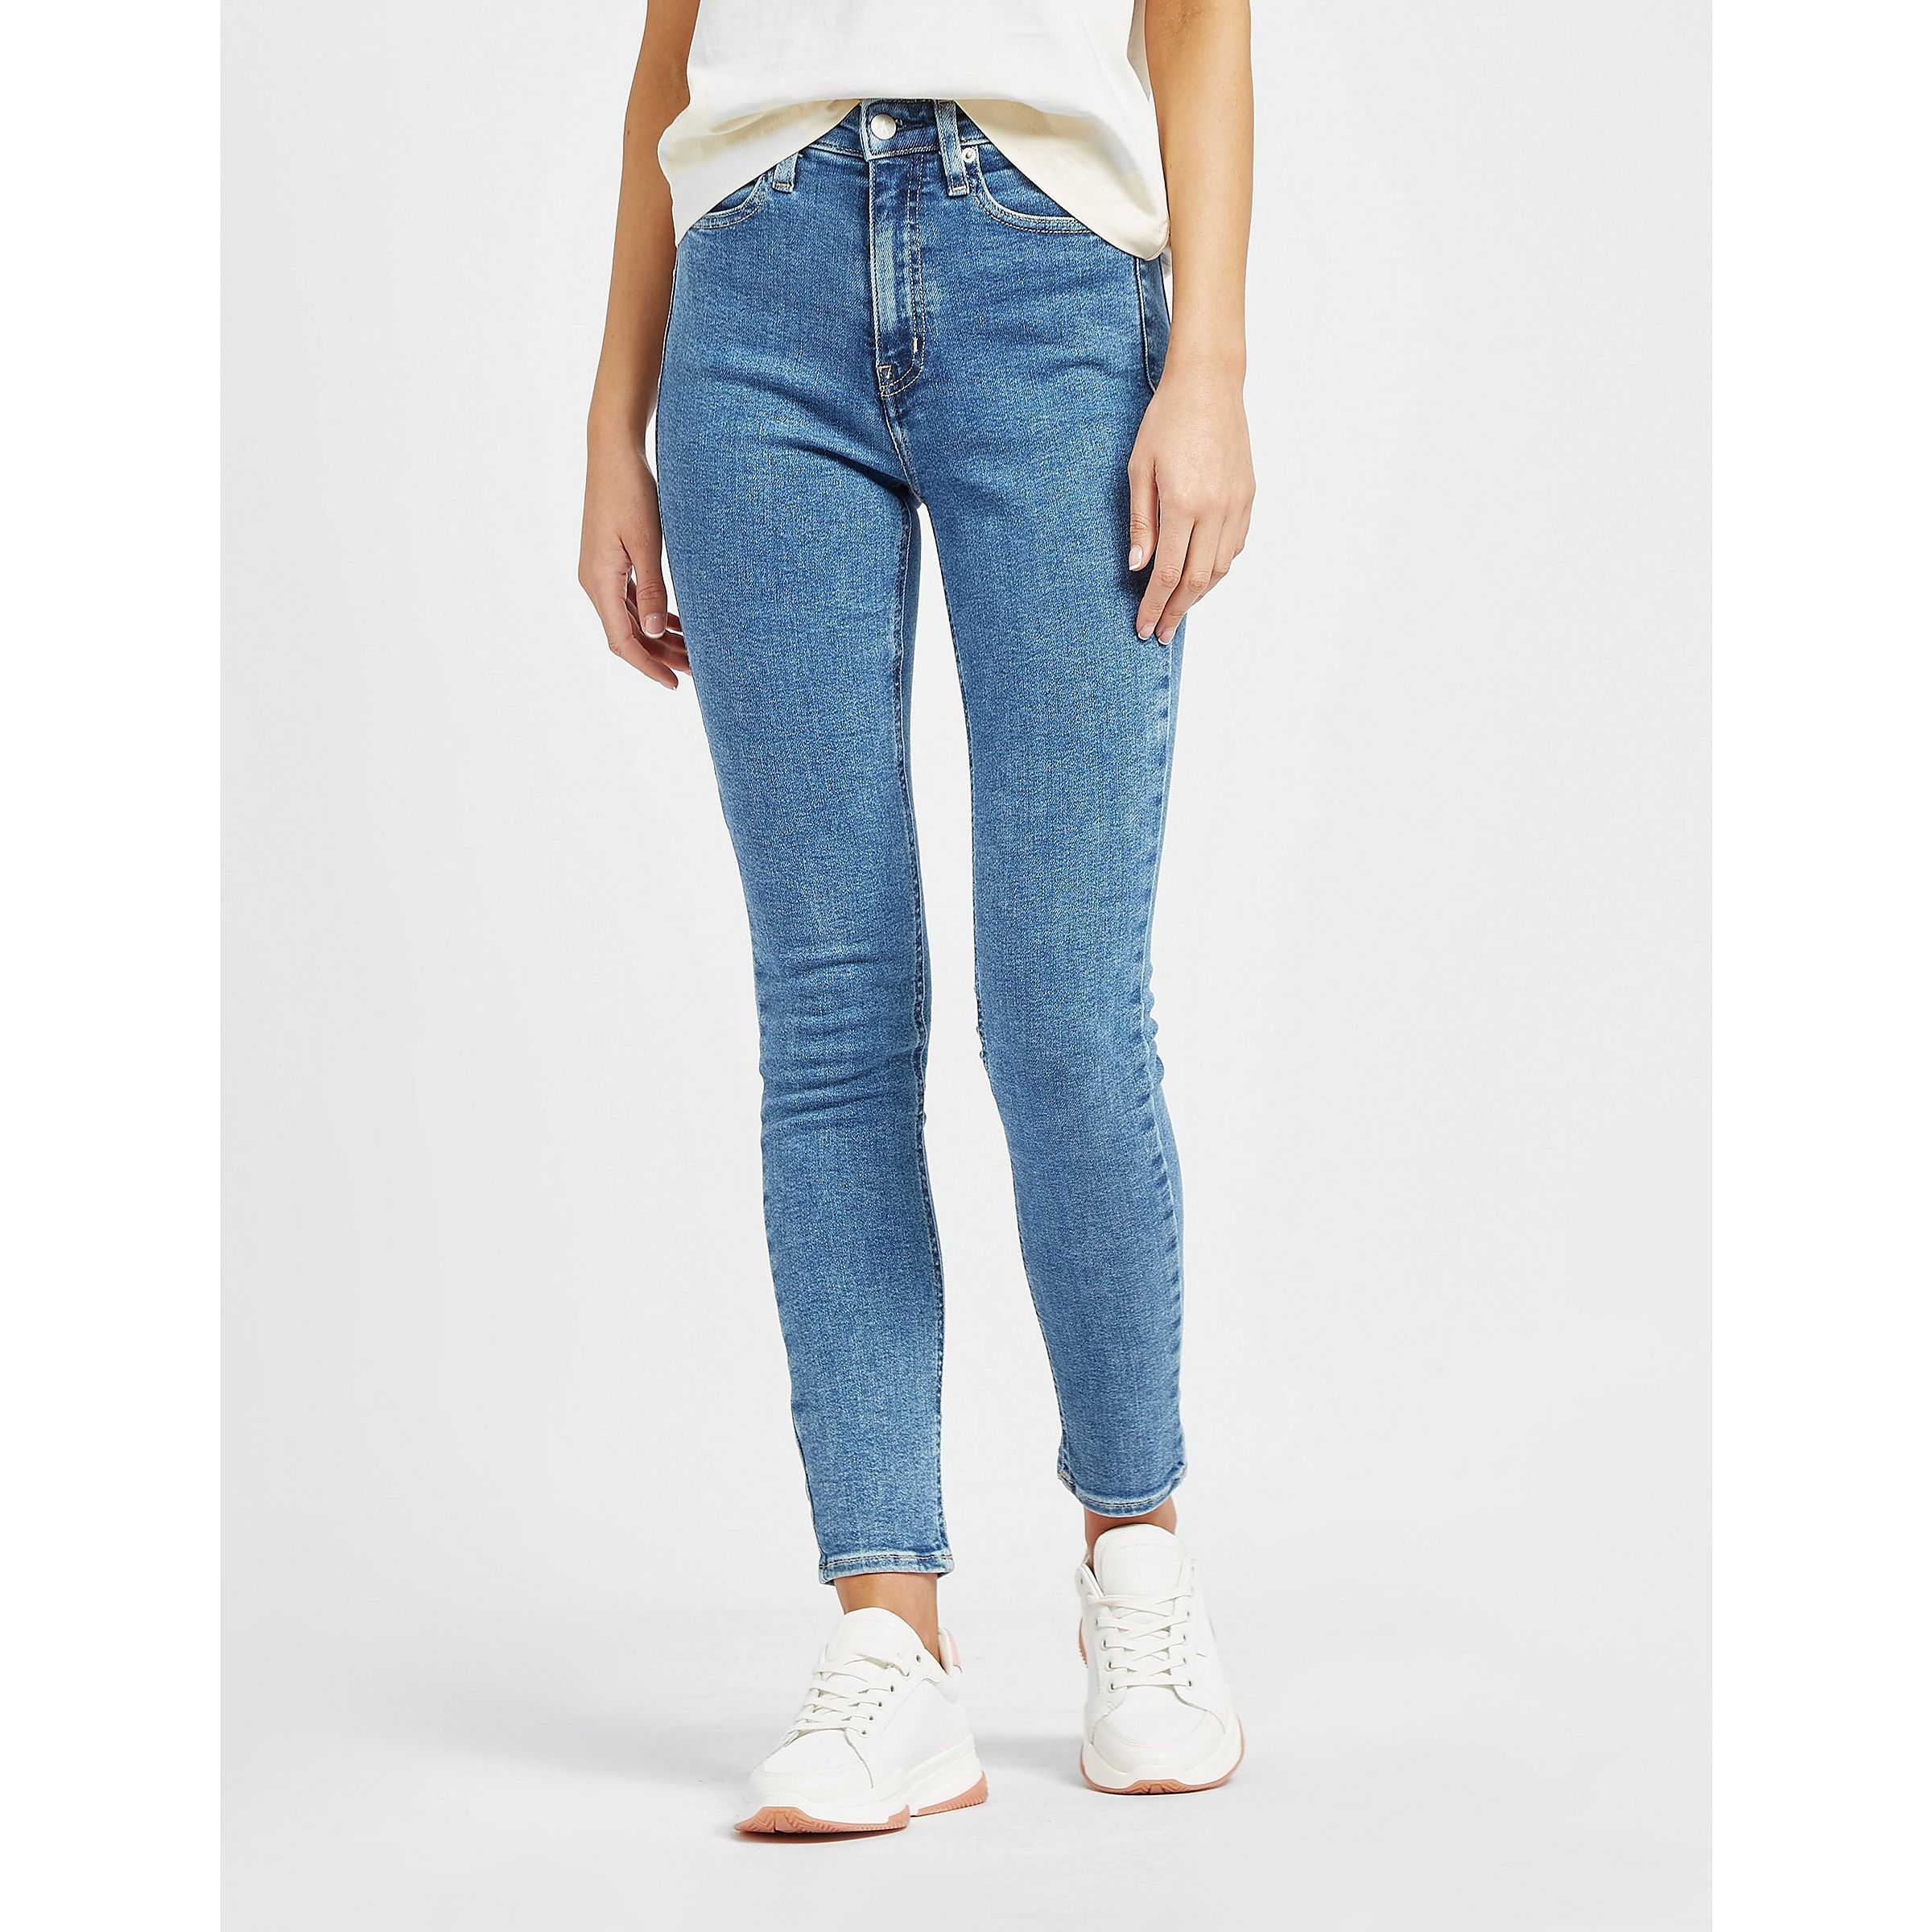 Womens High Rise Skinny Jeans